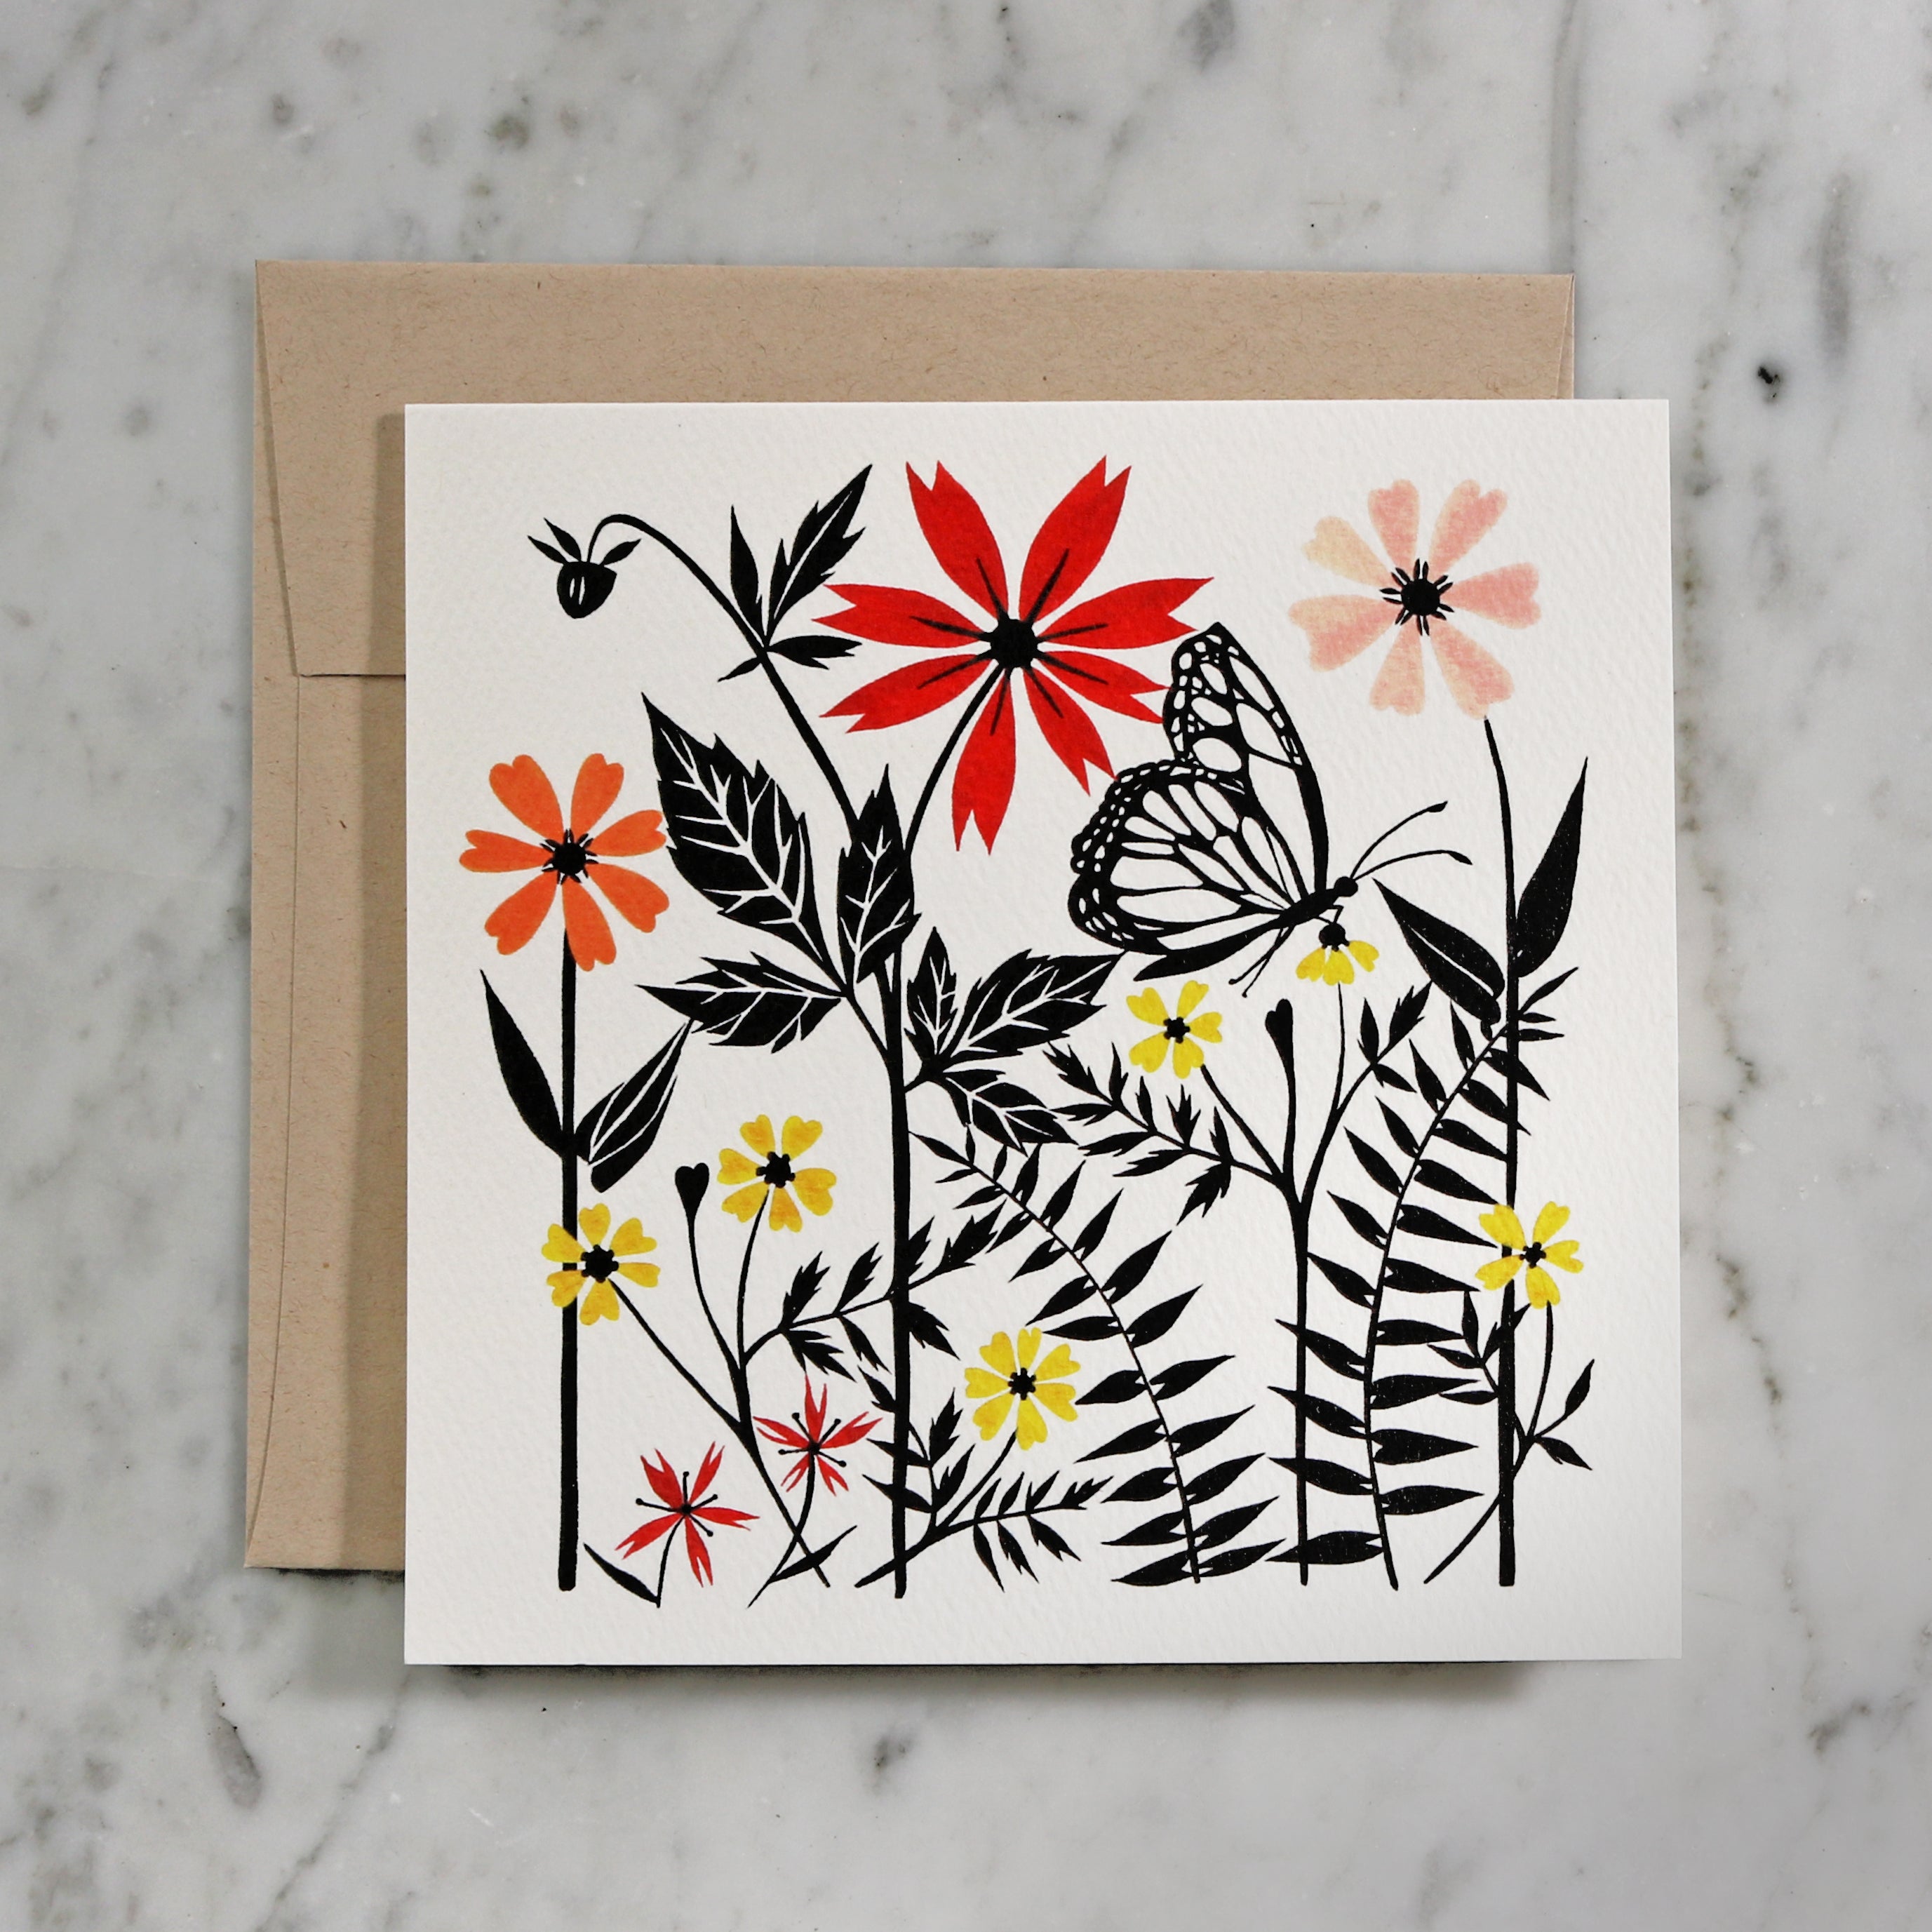 Whimsical Garden | Assorted Blank Greeting Card Set - 8 Cards